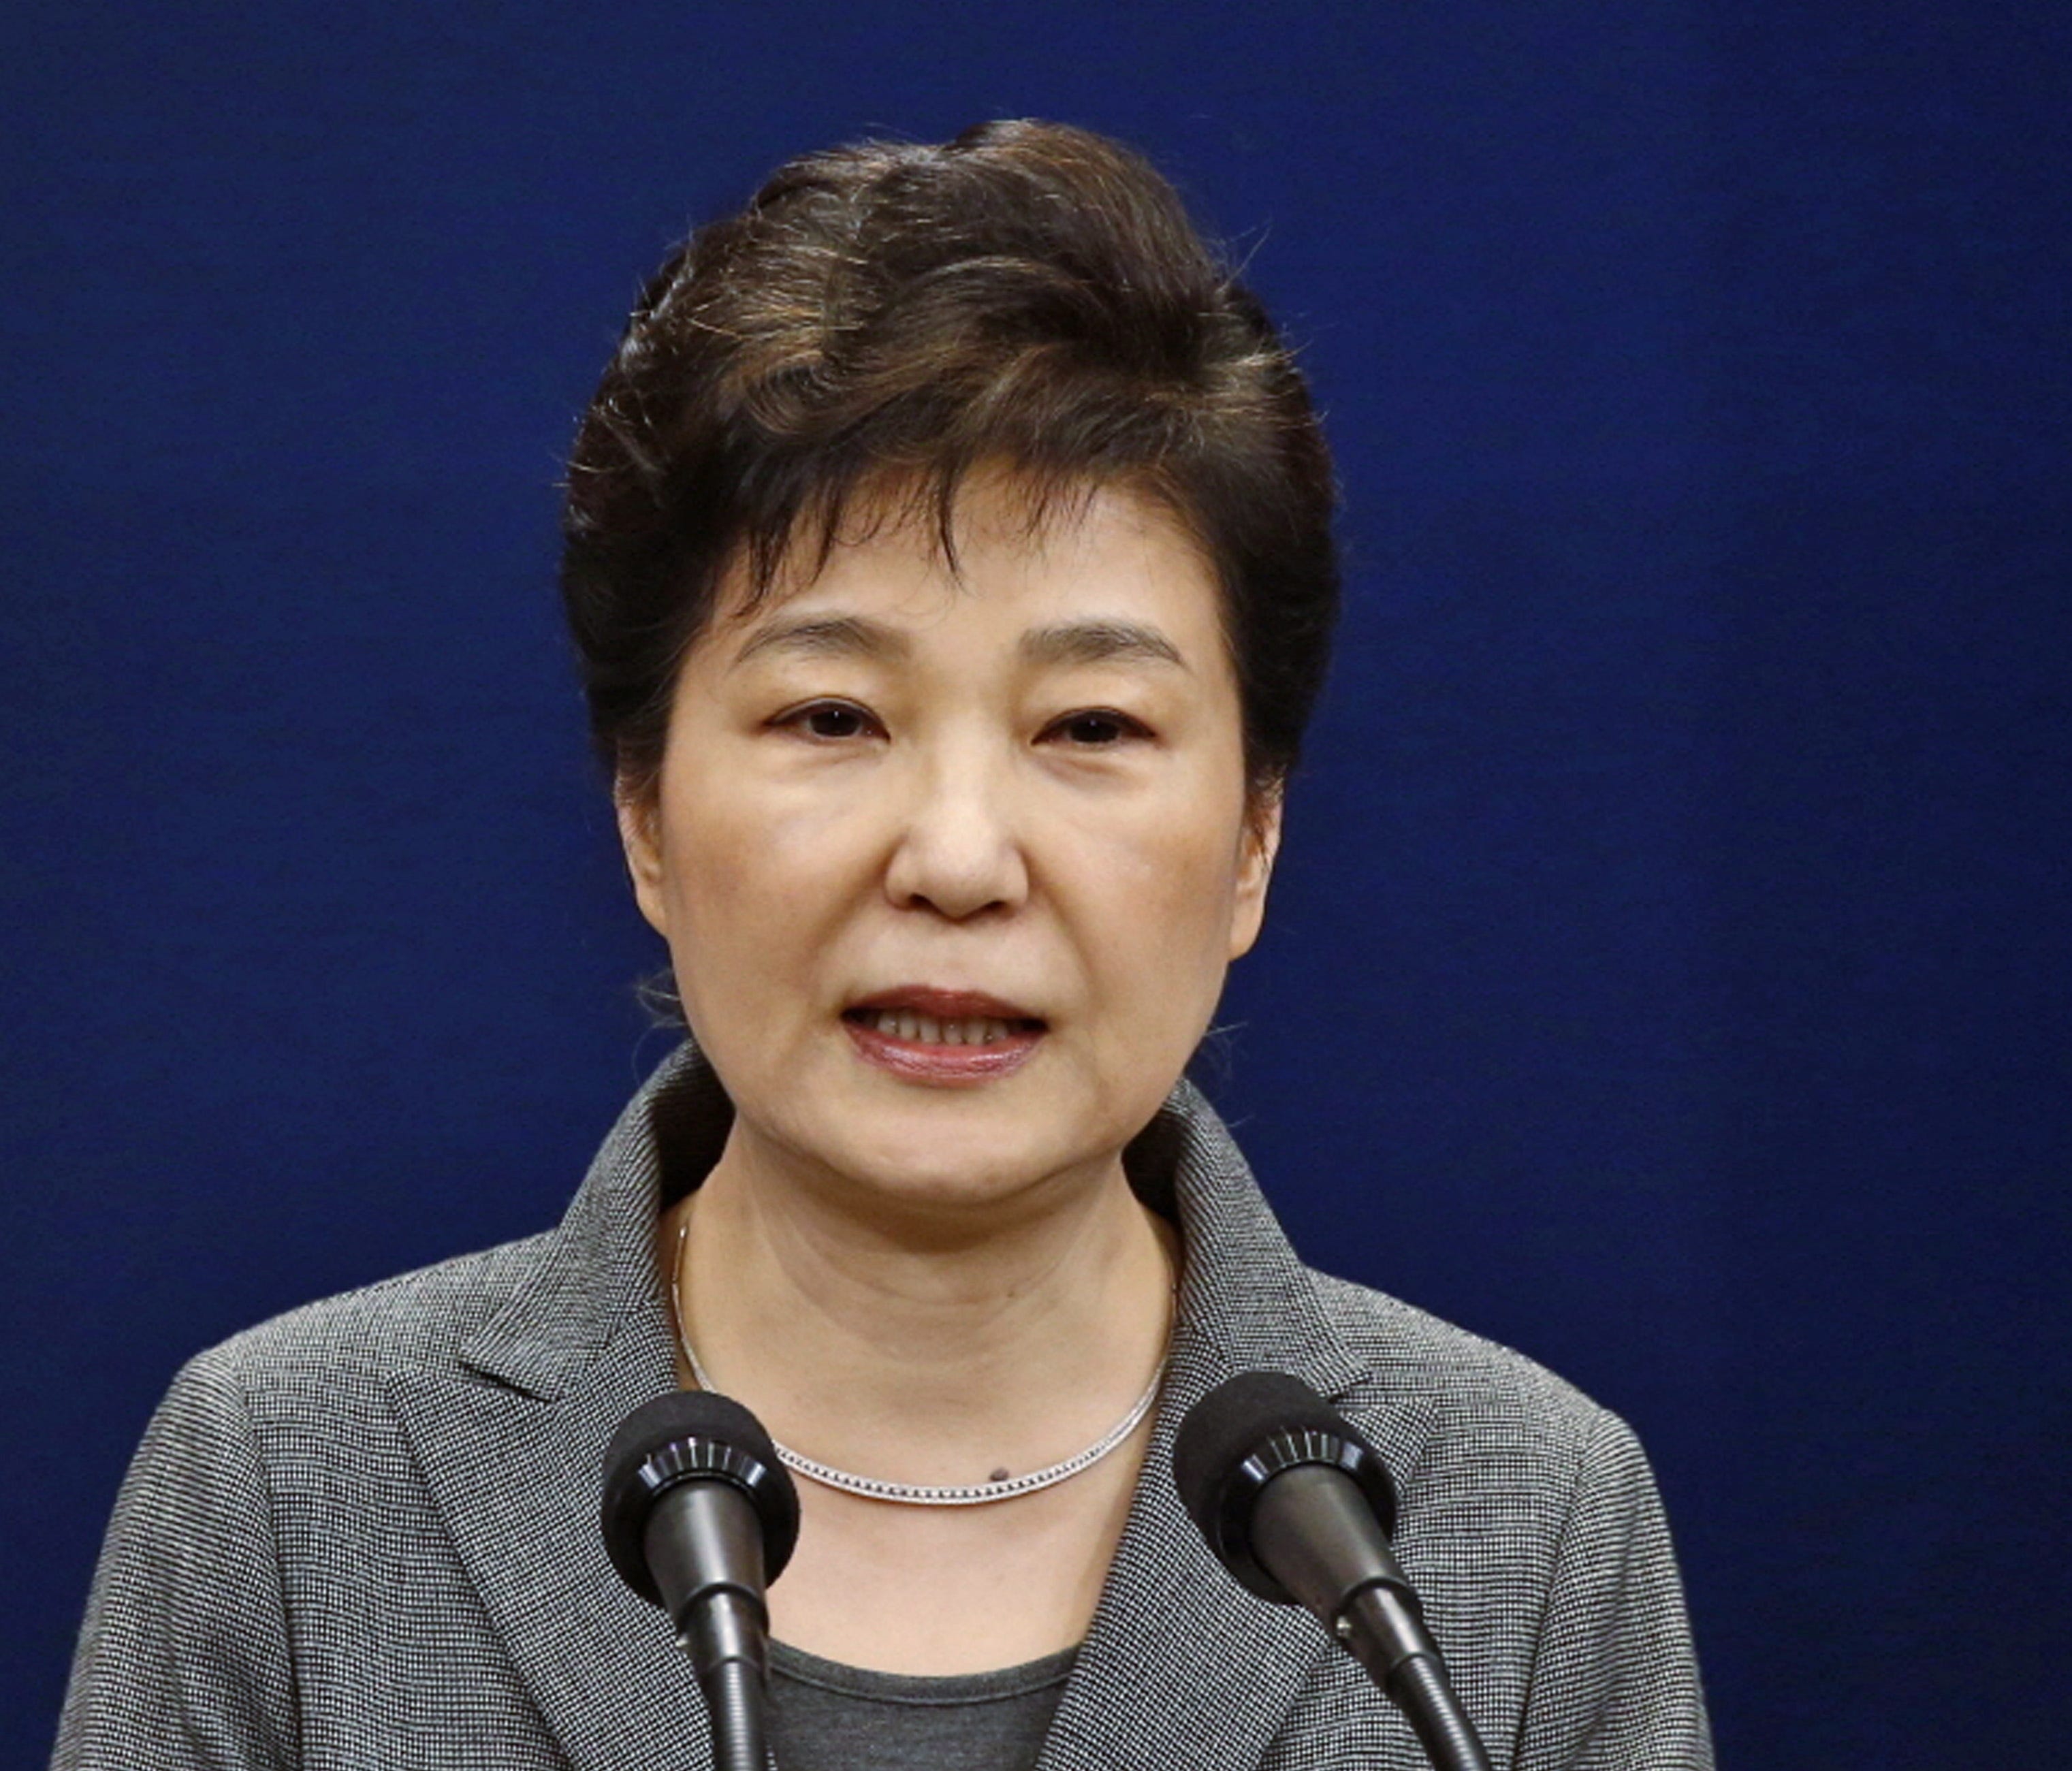 Park Geun-hye is pictured making a live televised address in Seoul, South Korea. South Korea's Constitutional Court ruled to formally end her presidency.